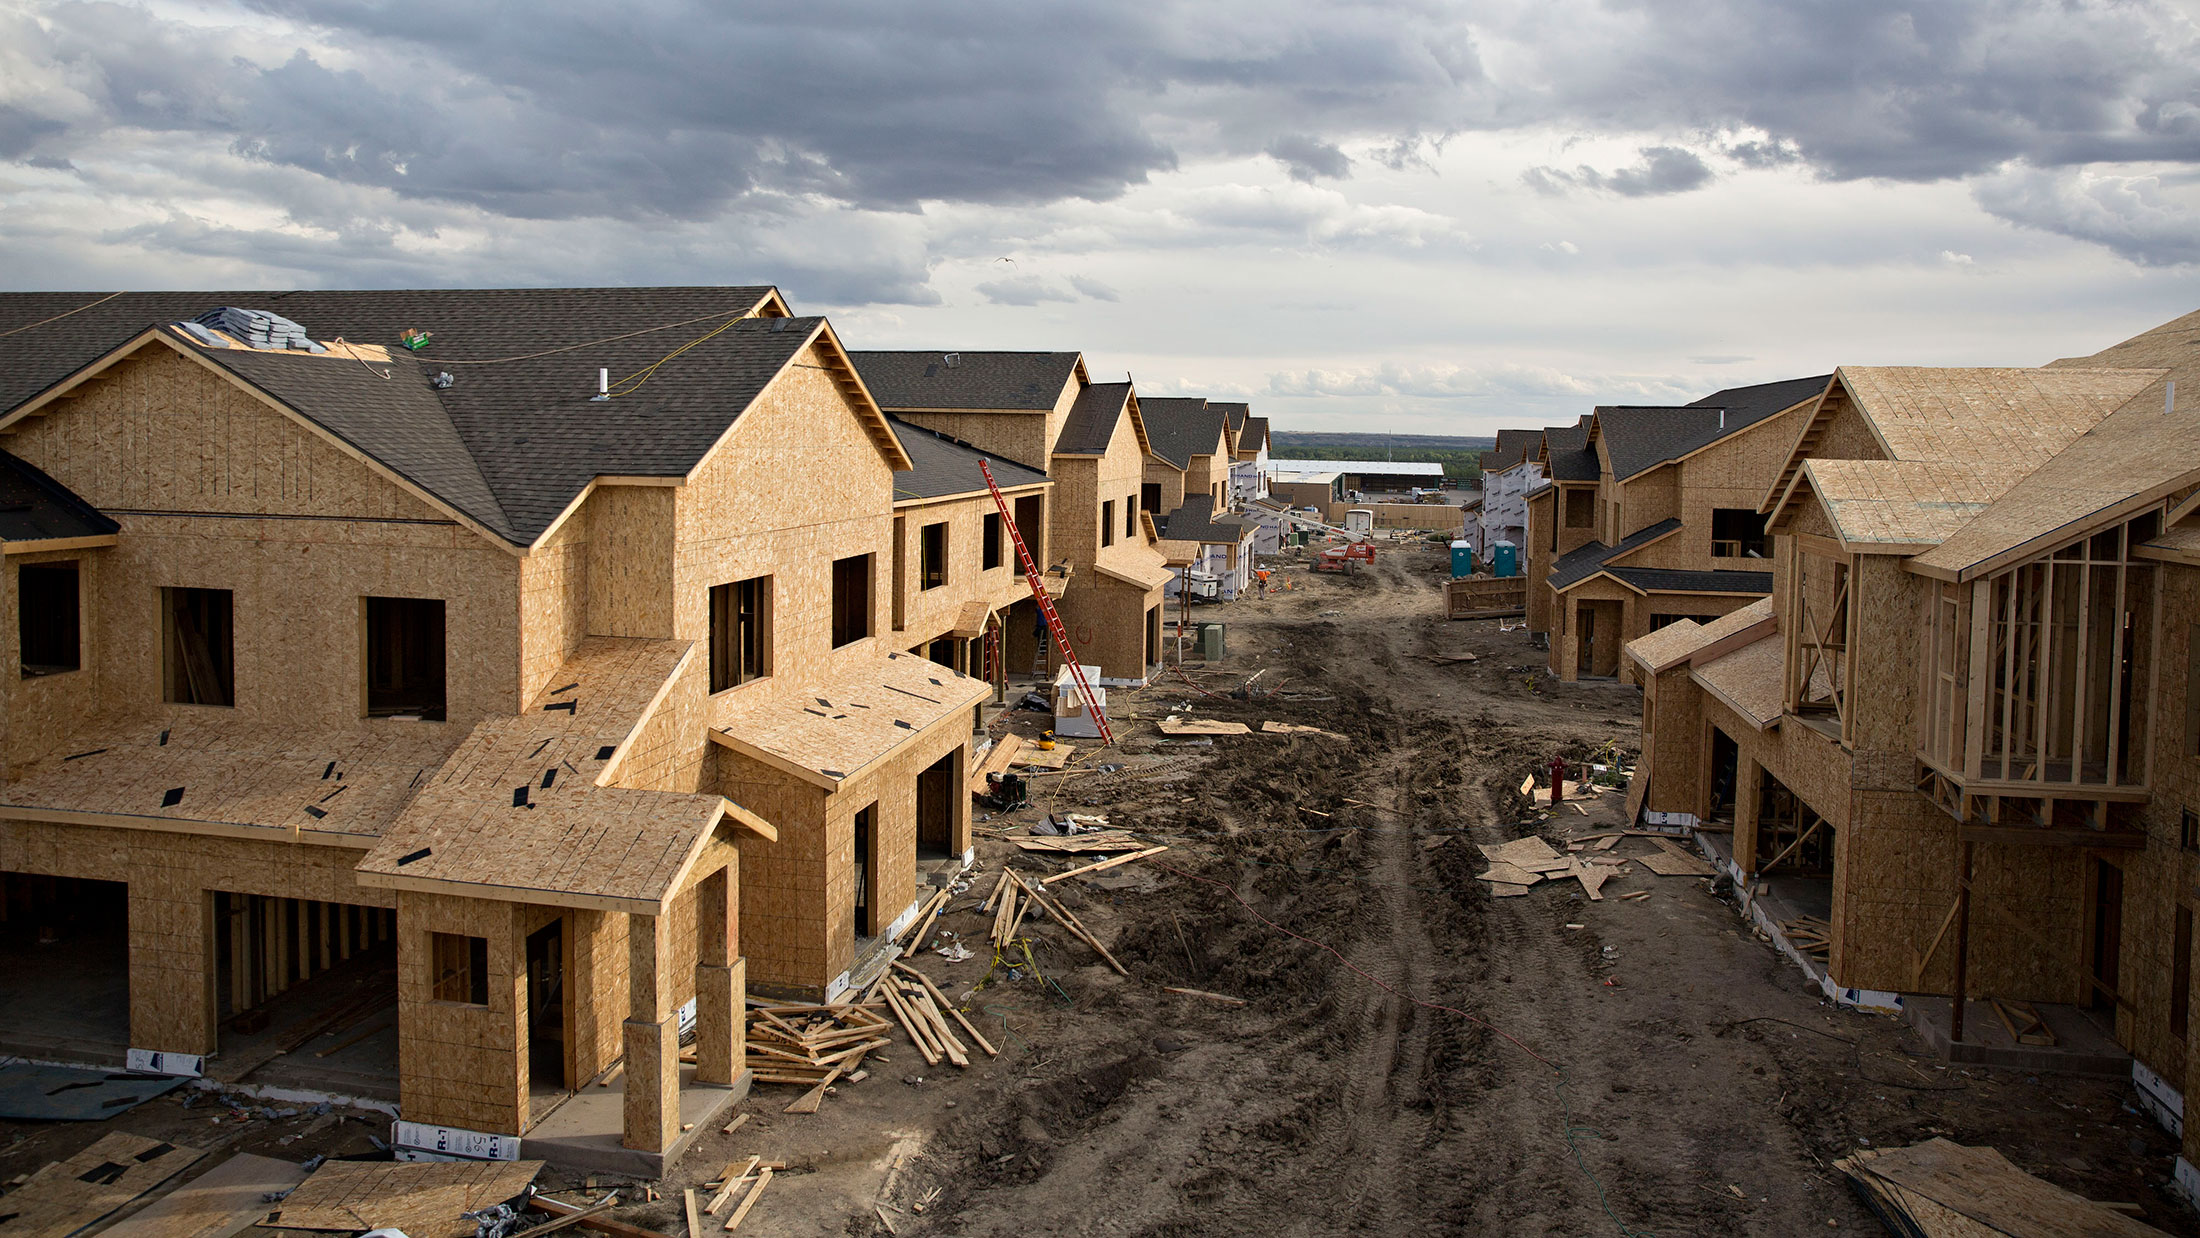 Partially completed buildings stand during construction at the Williston Apartments luxury apartment complex in Williston, North Dakota, on Sept. 9, 2015.
